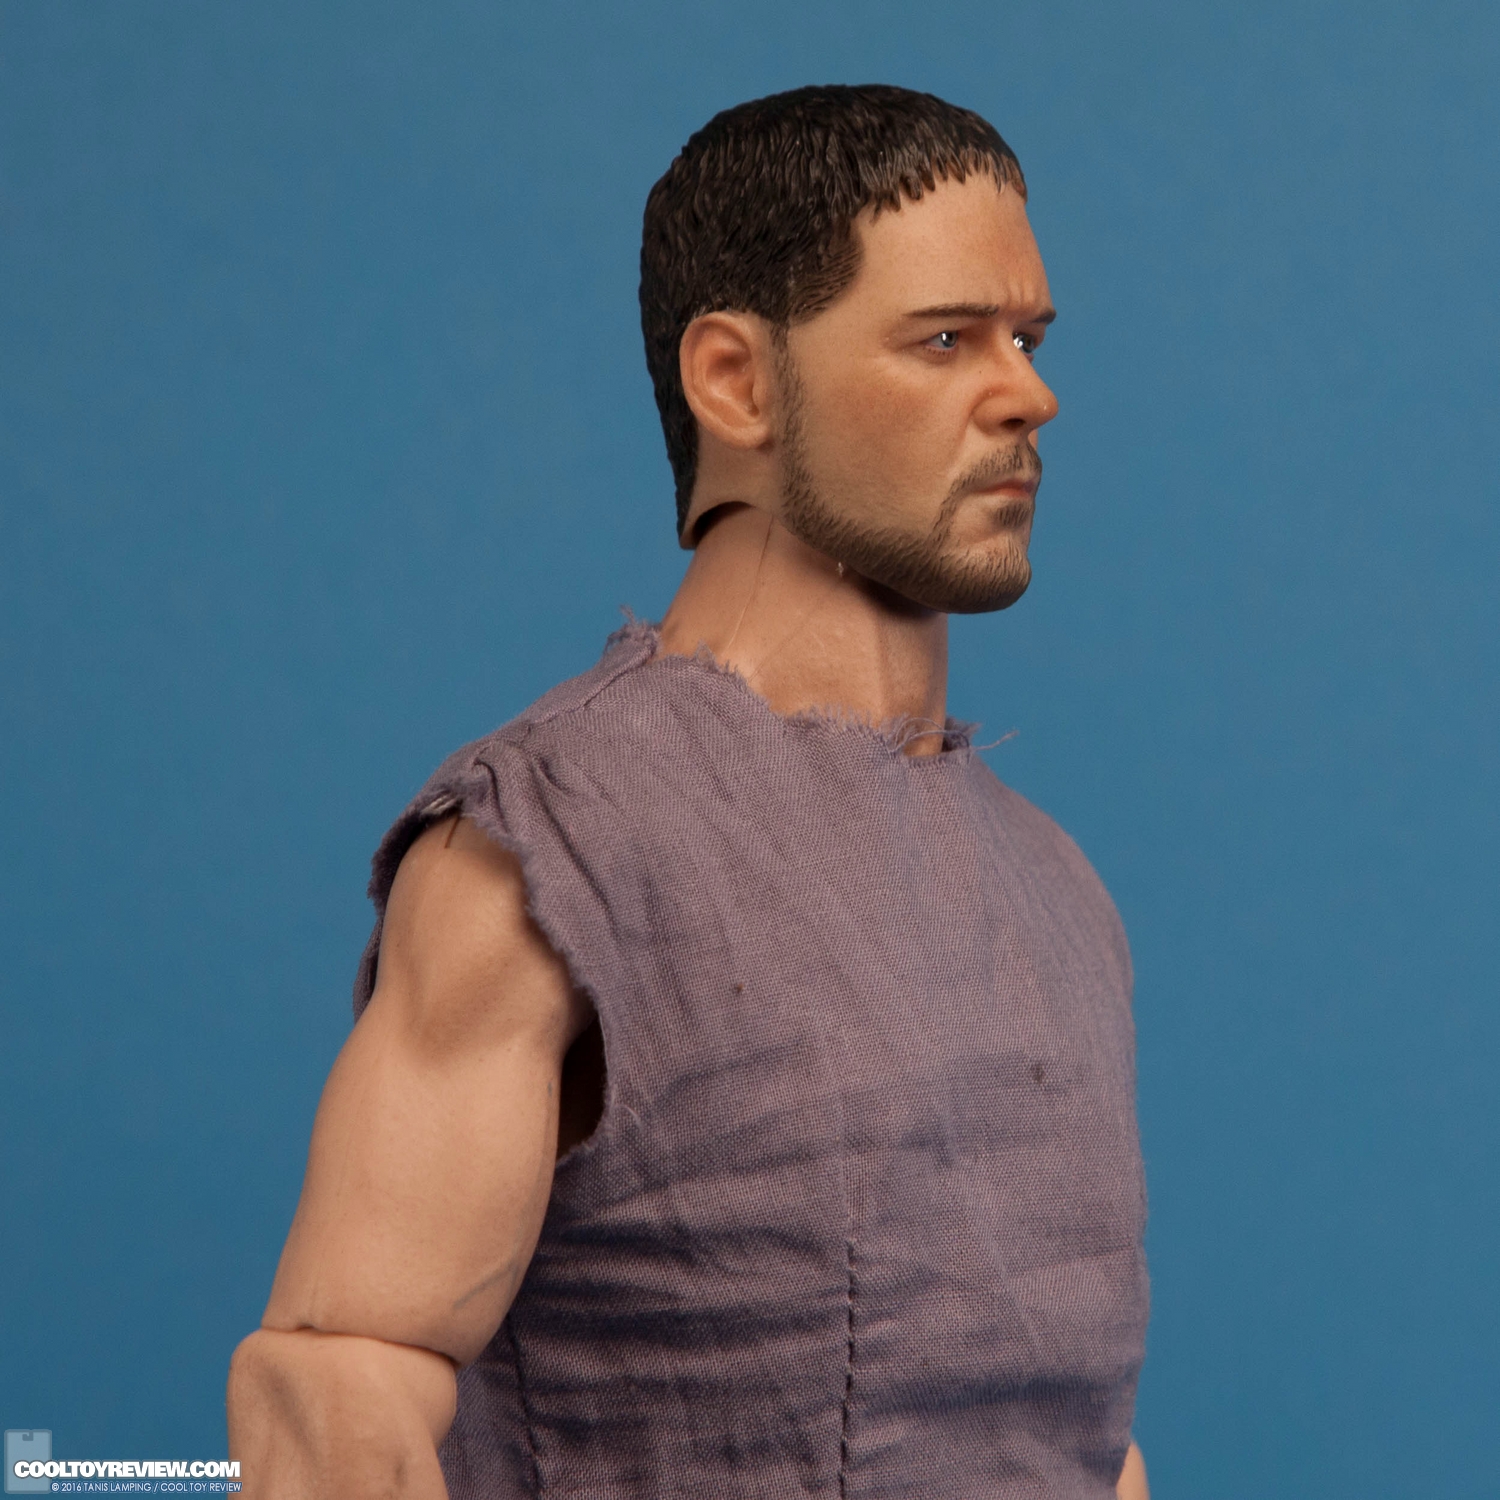 pangaea-toy-gladiator-general-sixth-scale-collectible-figure-030.jpg